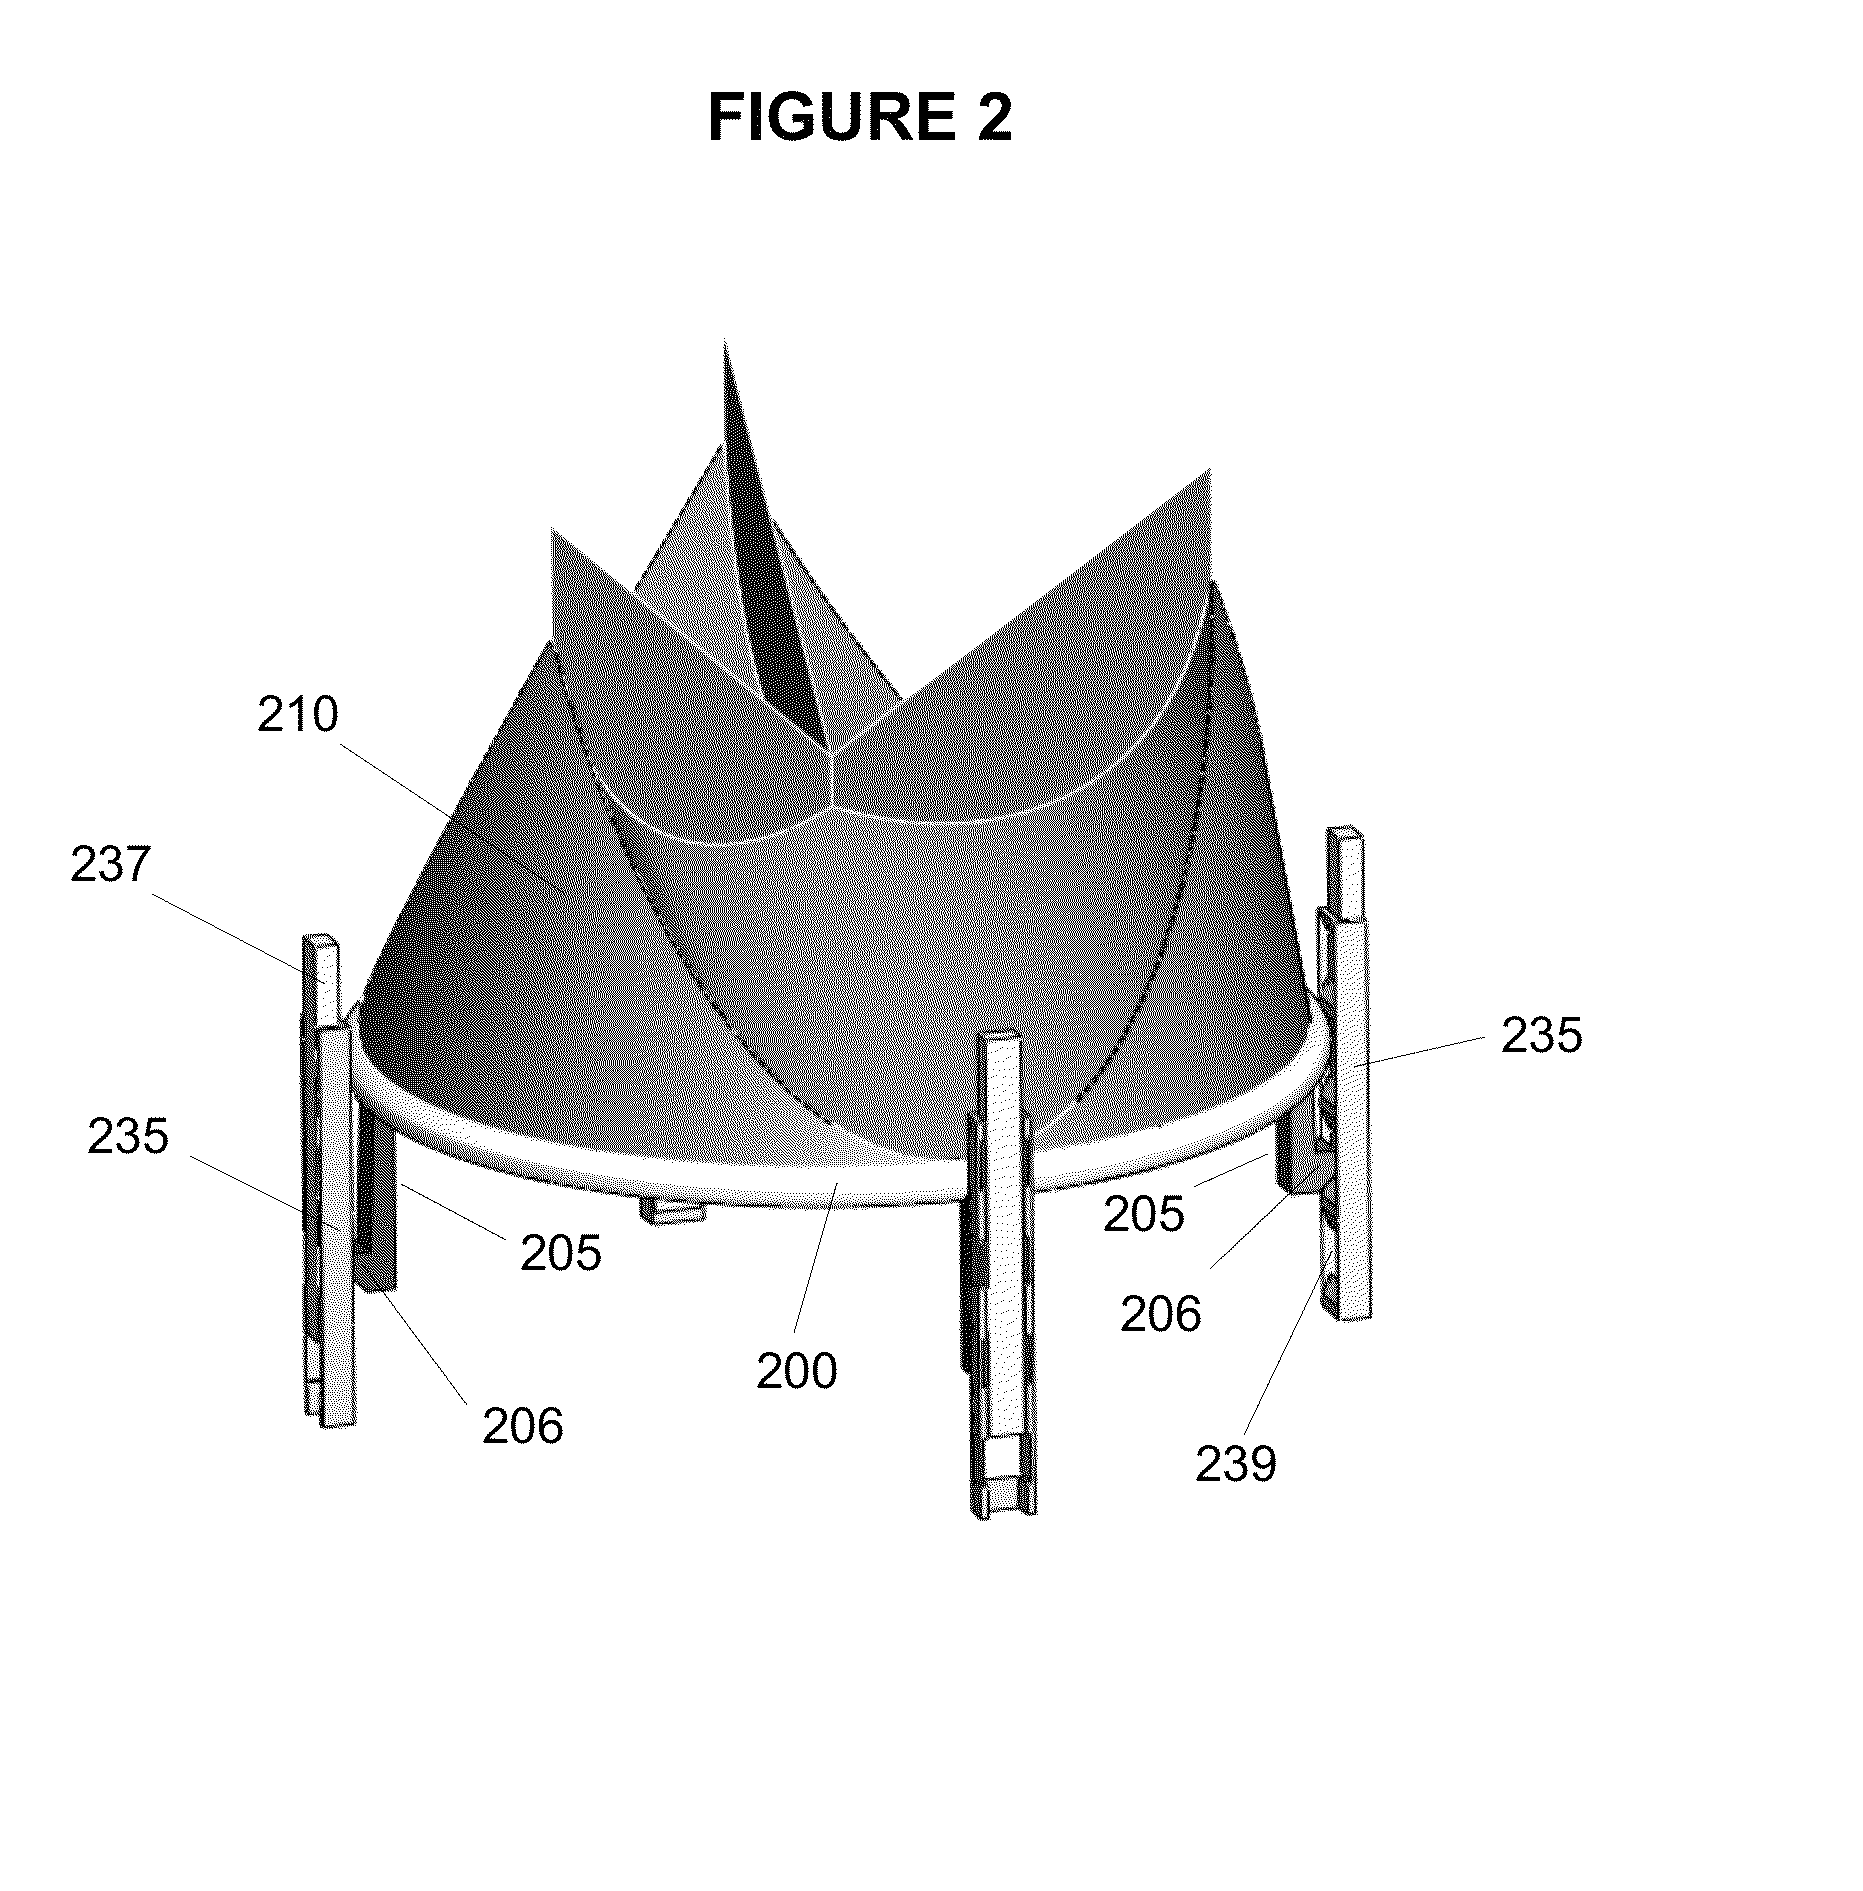 Method and apparatus for fine adjustment of a percutaneous valve structure